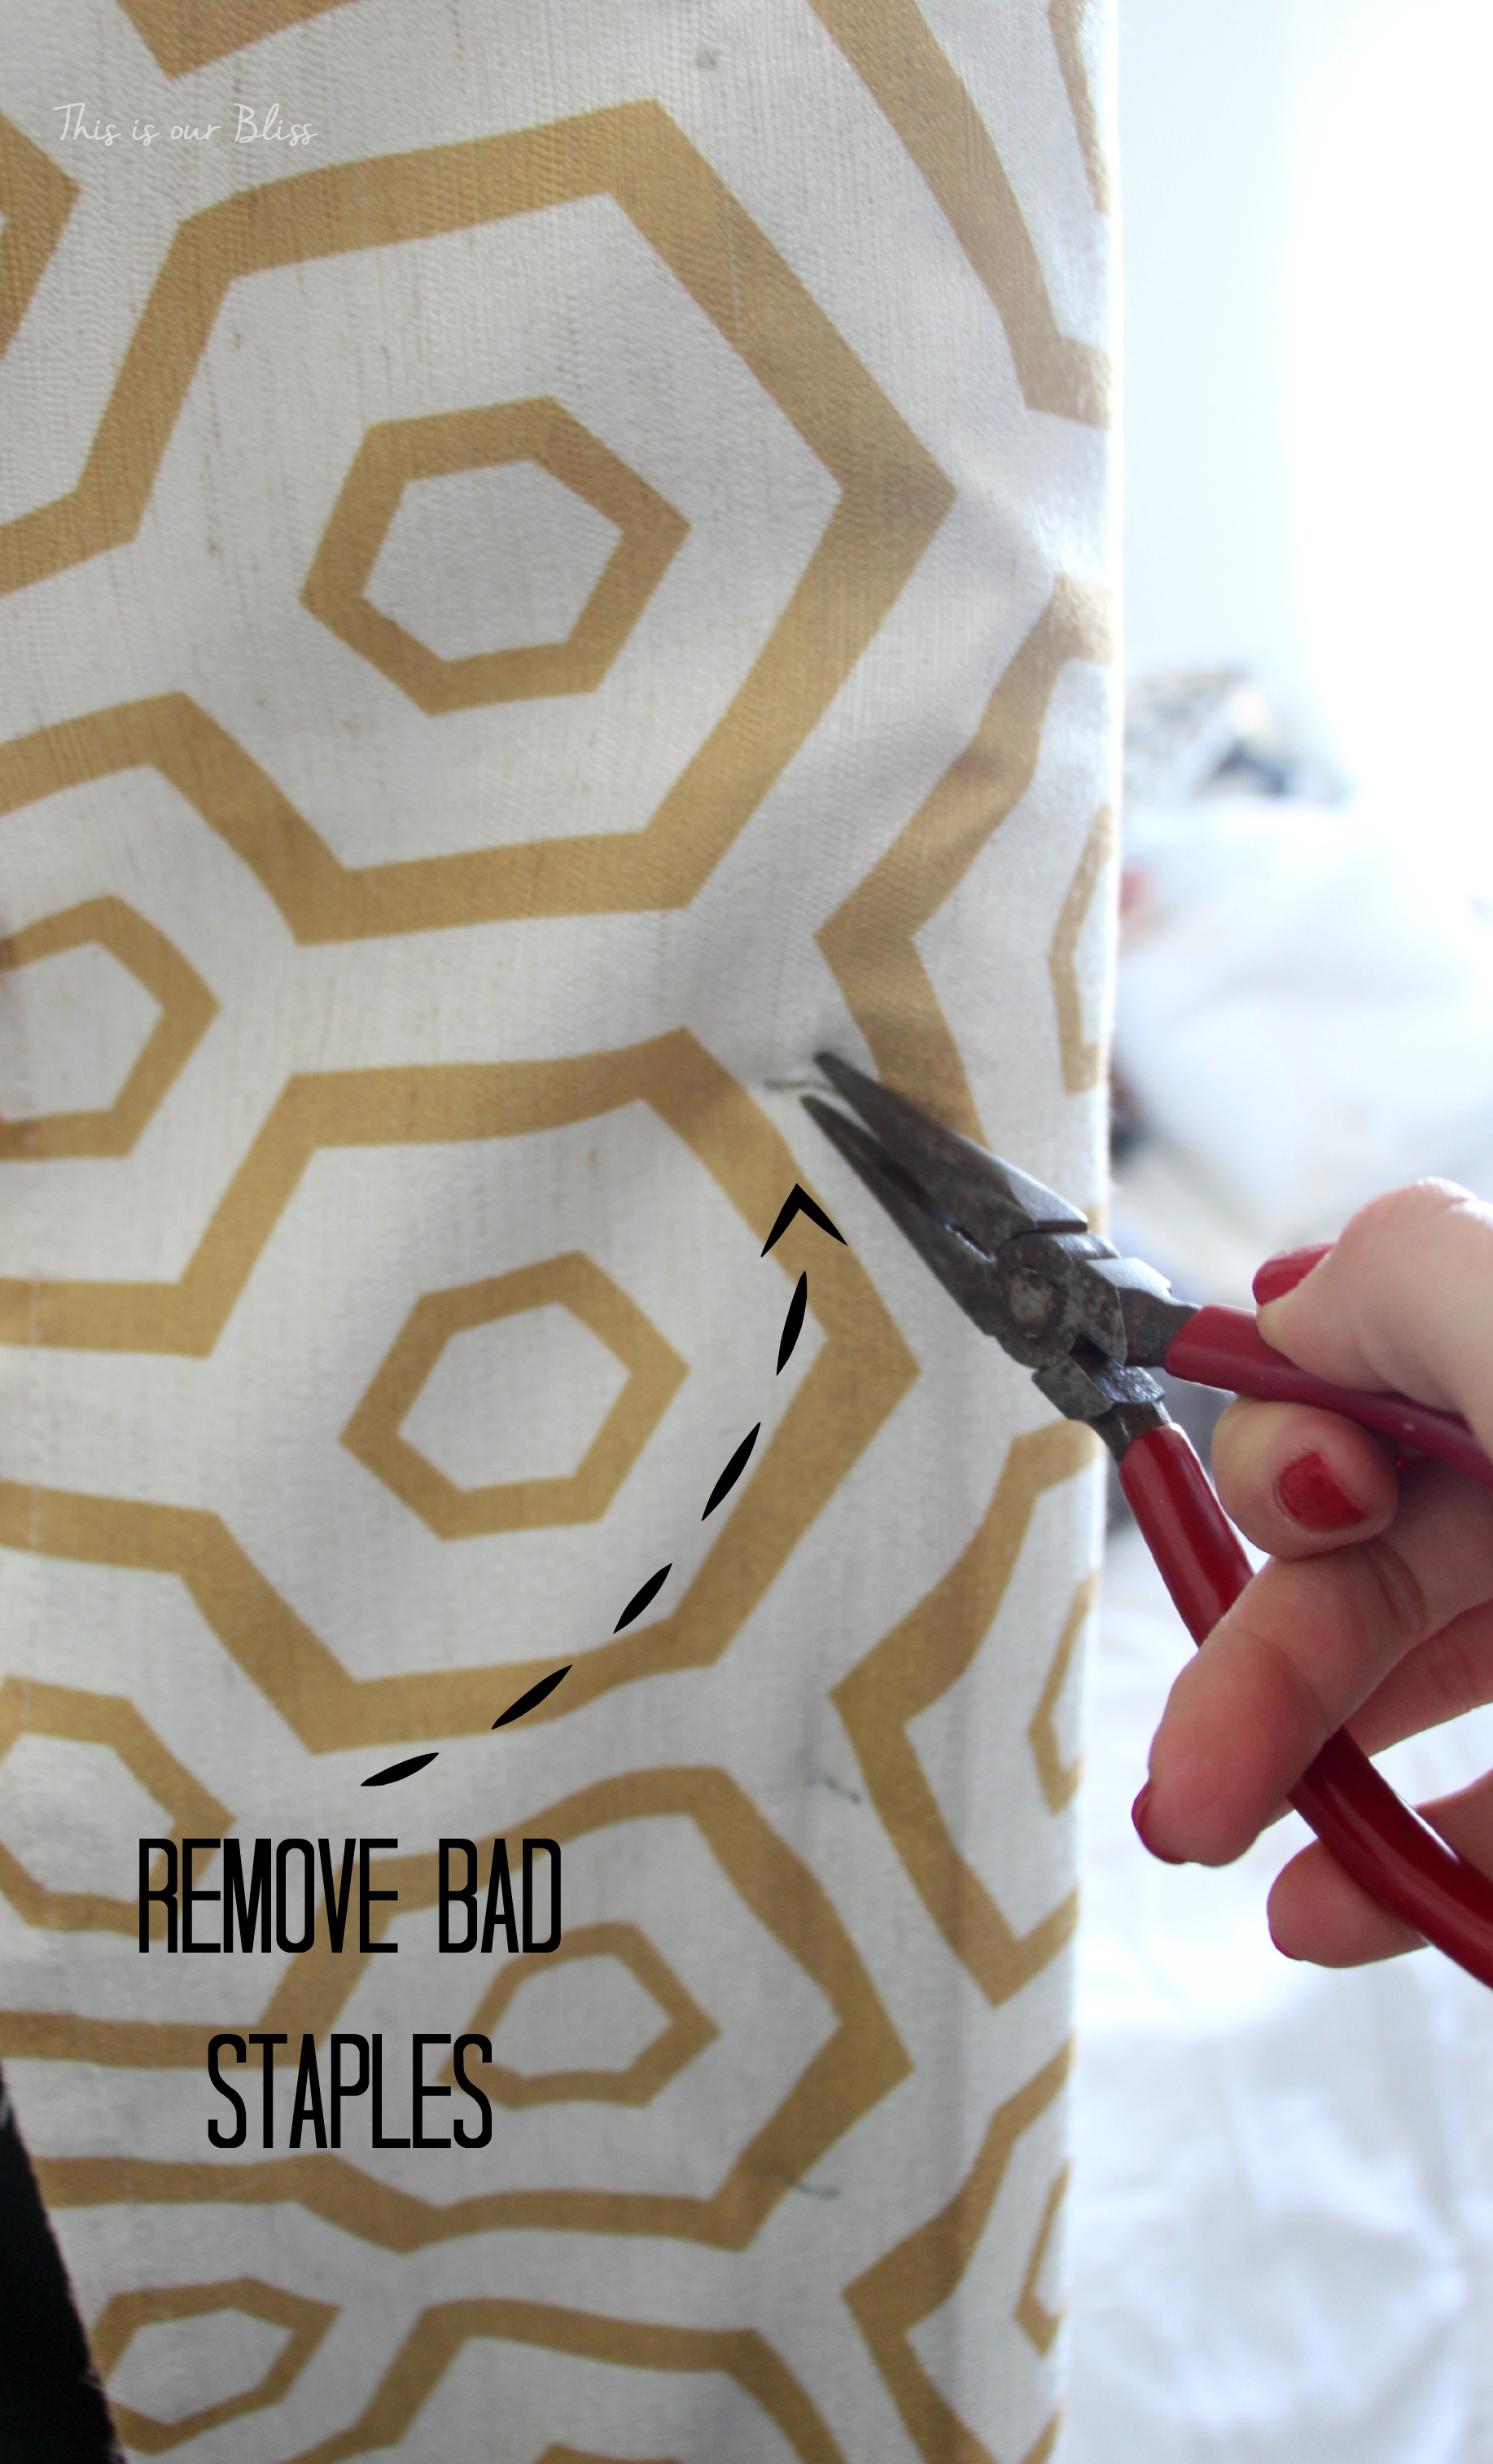 hwo to reupholster a headboard with a curtain panel - remove bad staples with needlenose pliers - this is our bliss